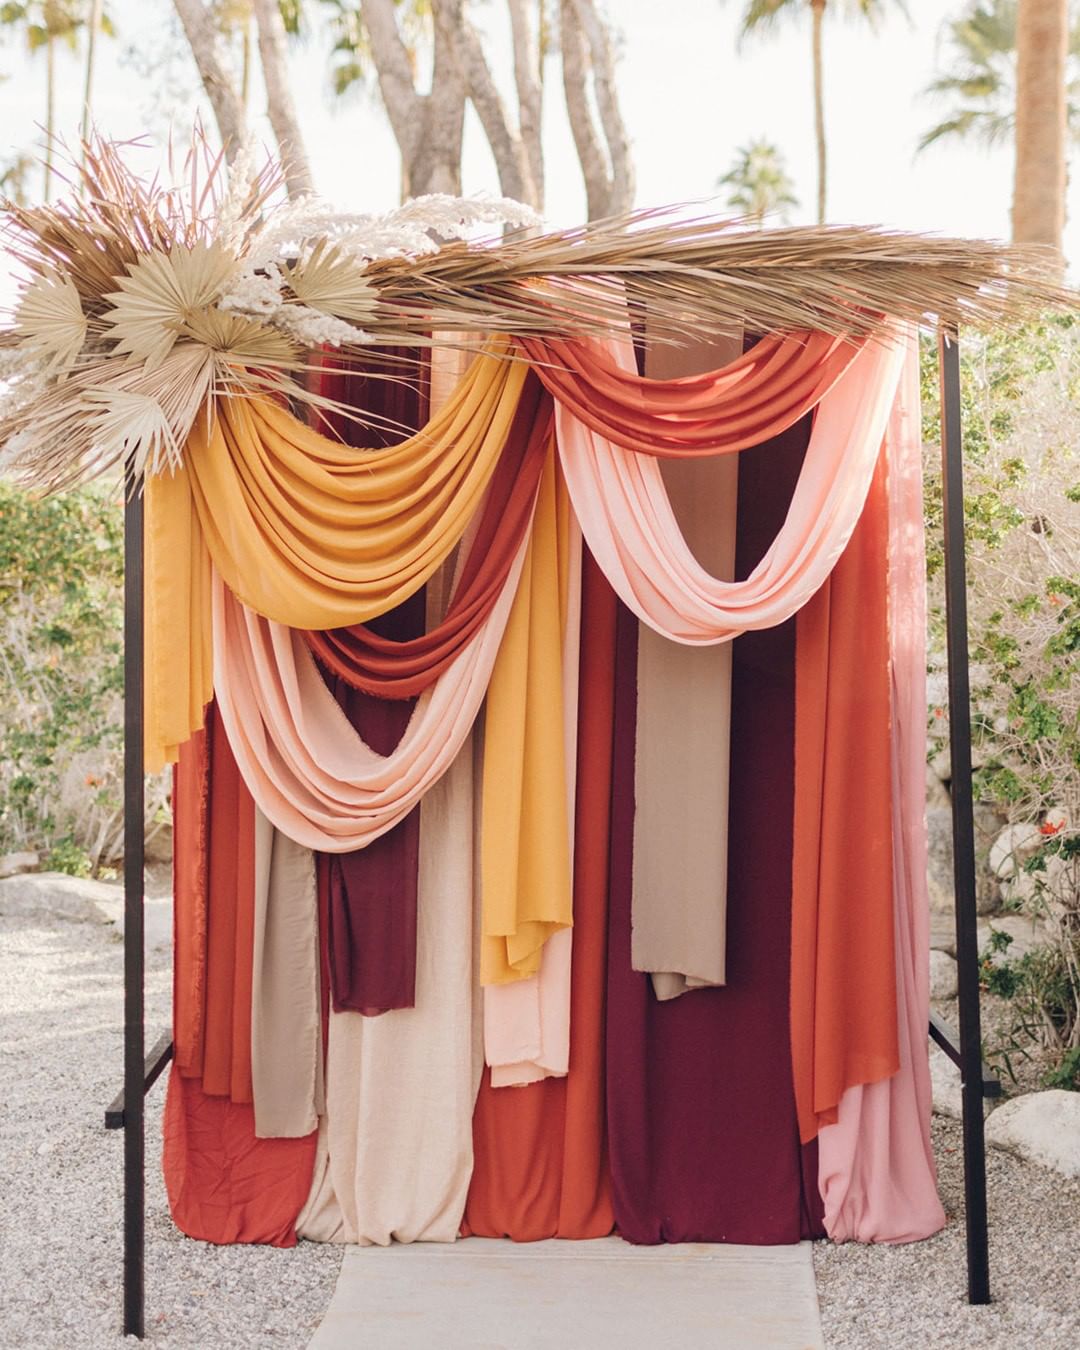 Cloth draped over a metal frame with fall wedding colors in mind